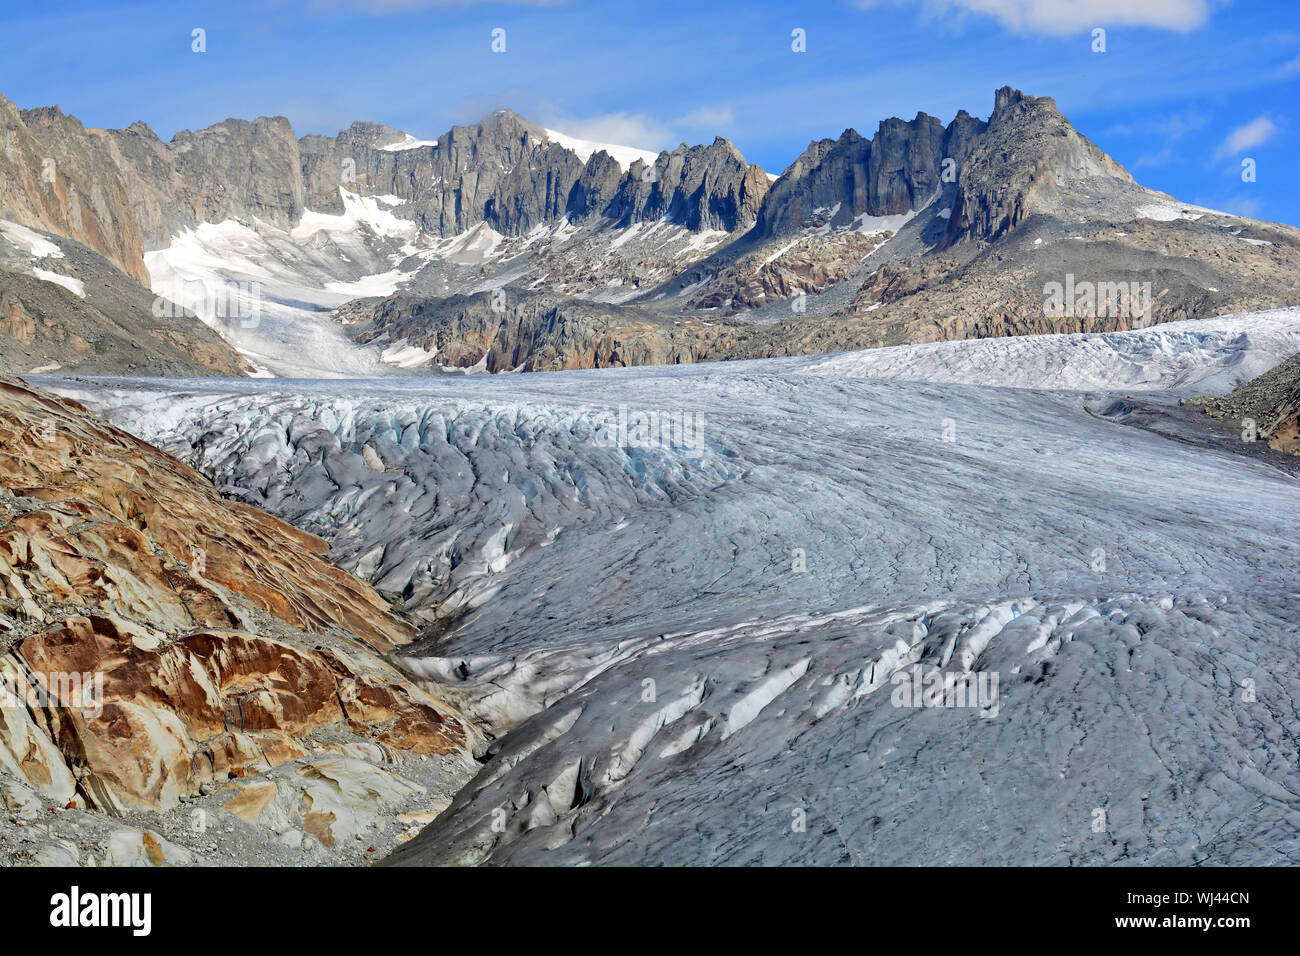 The Rhone Glacier which marks the source of the River Rhone in the Swiss Alps. With the sheet protection over the ice to reduce melting Stock Photo